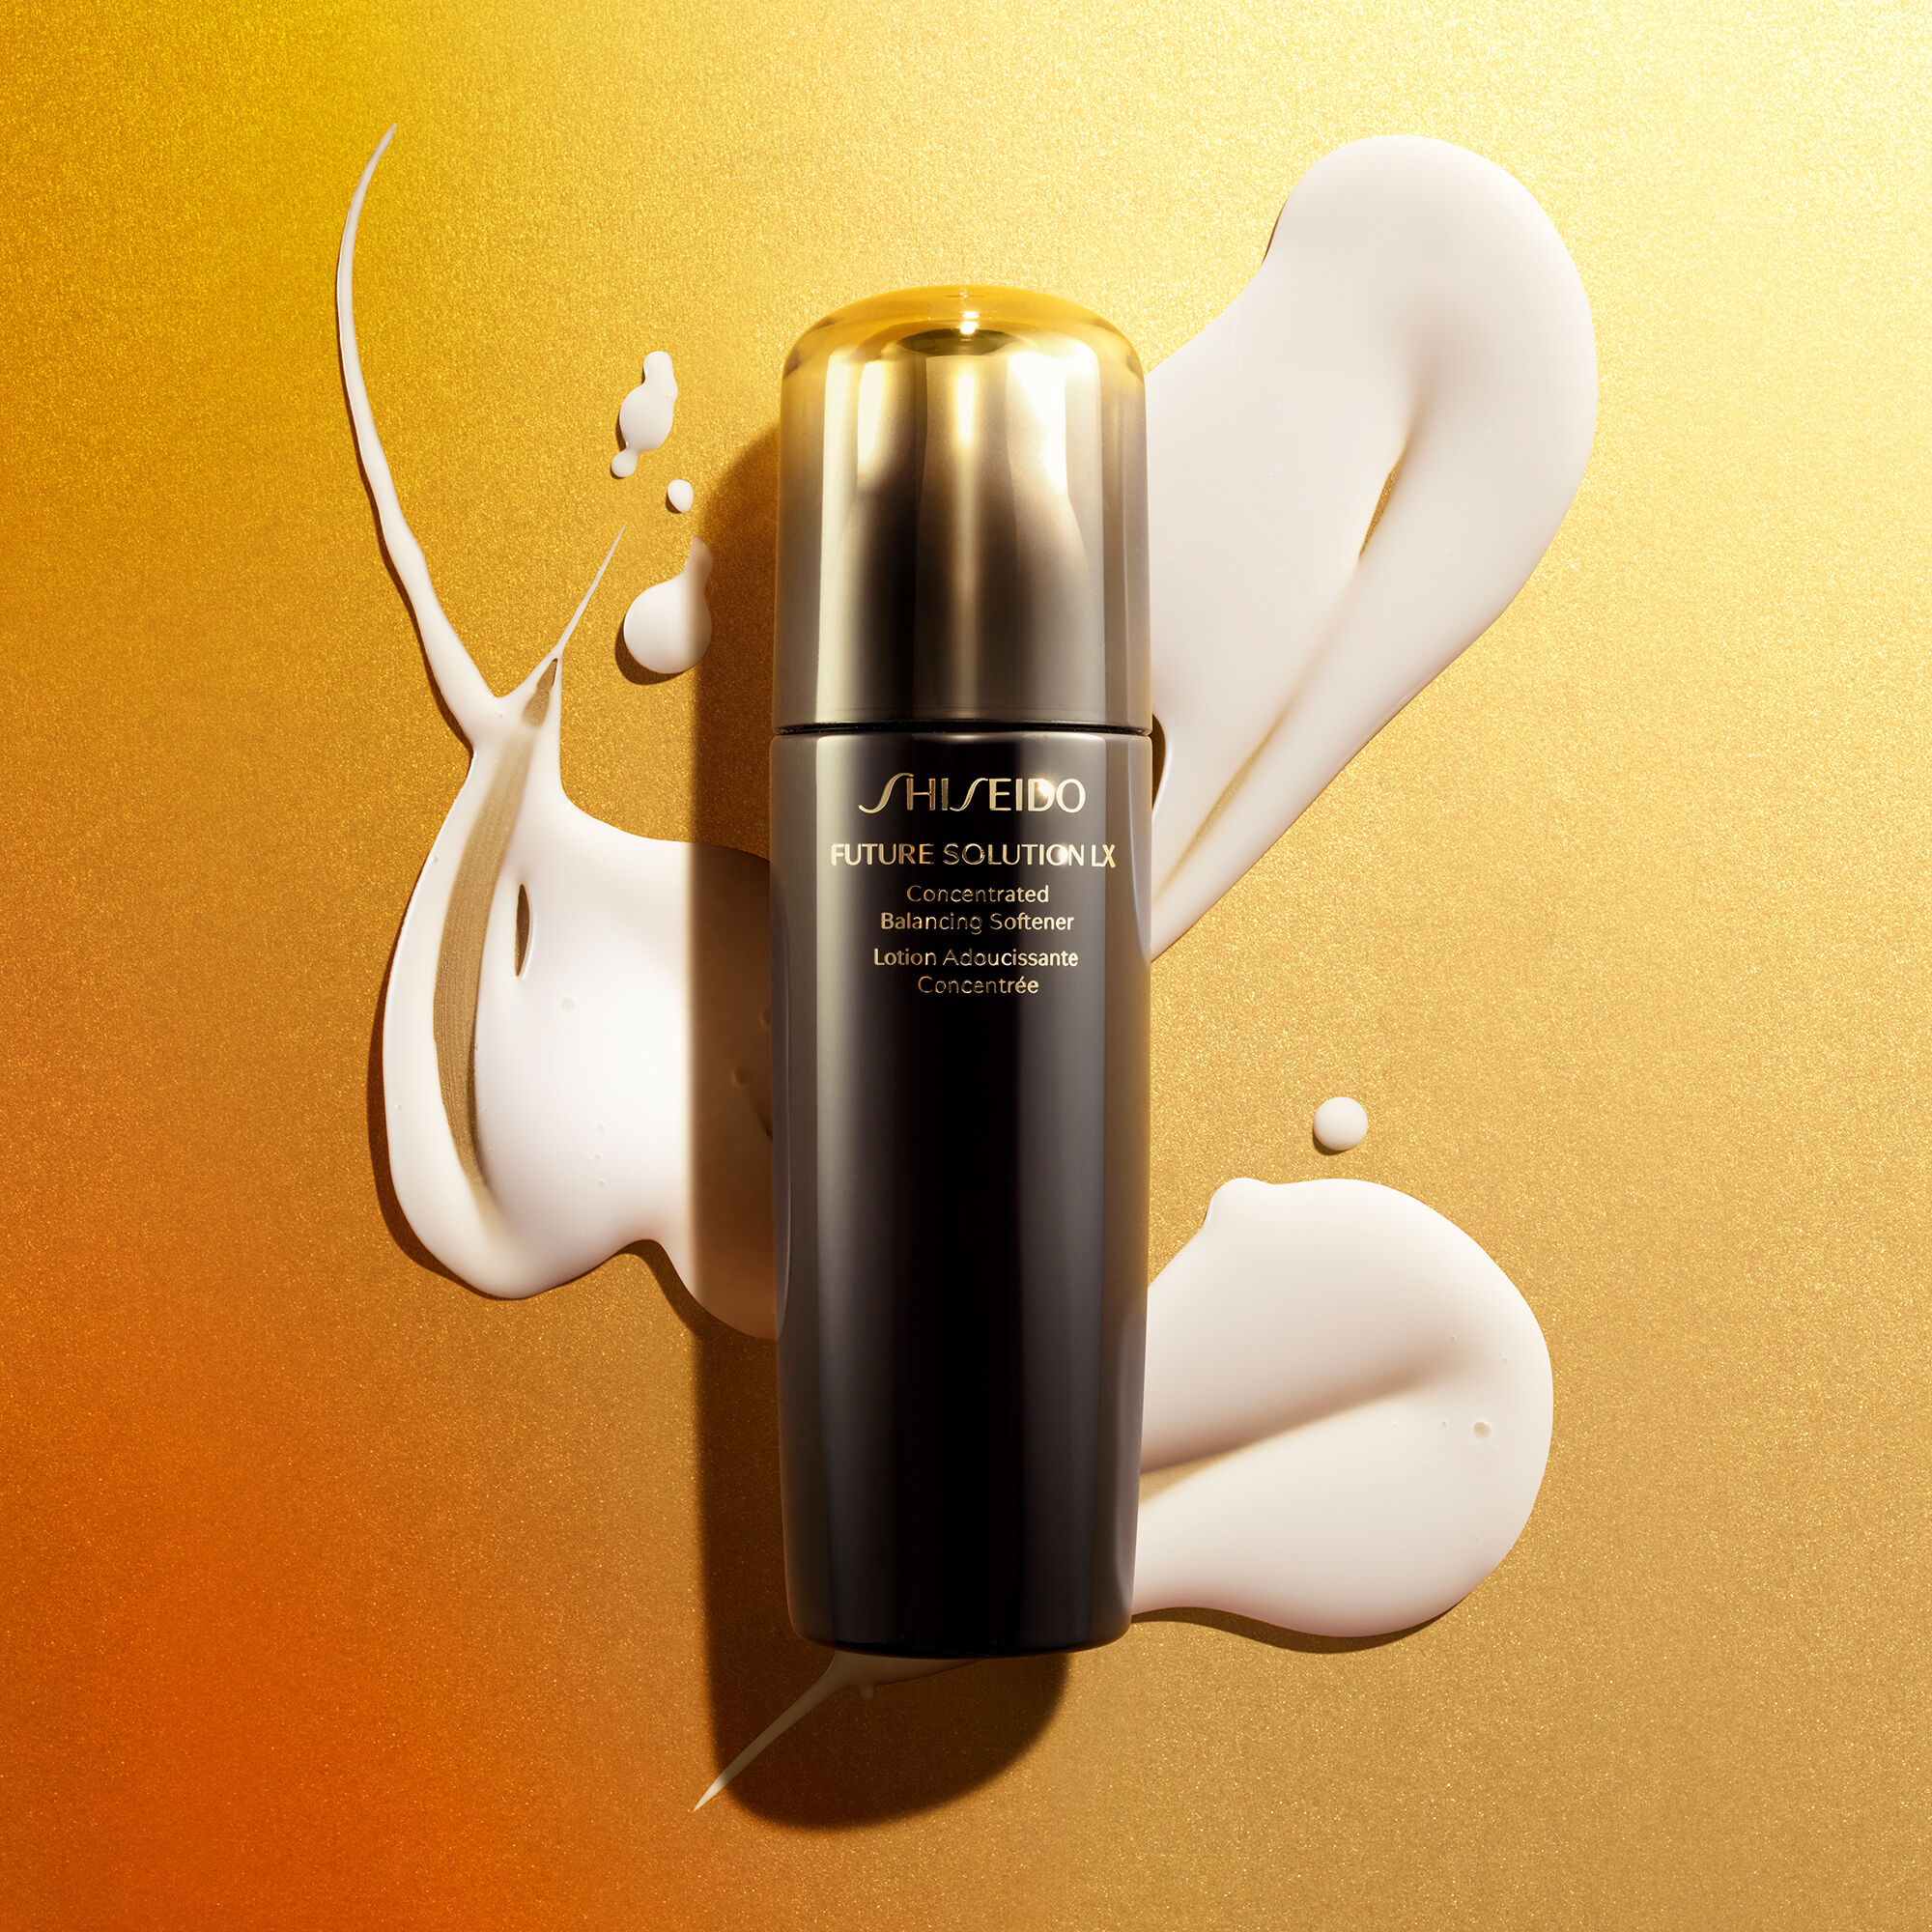 Shiseido Future Solution LX Concentrated Balancing Softener - 170mL